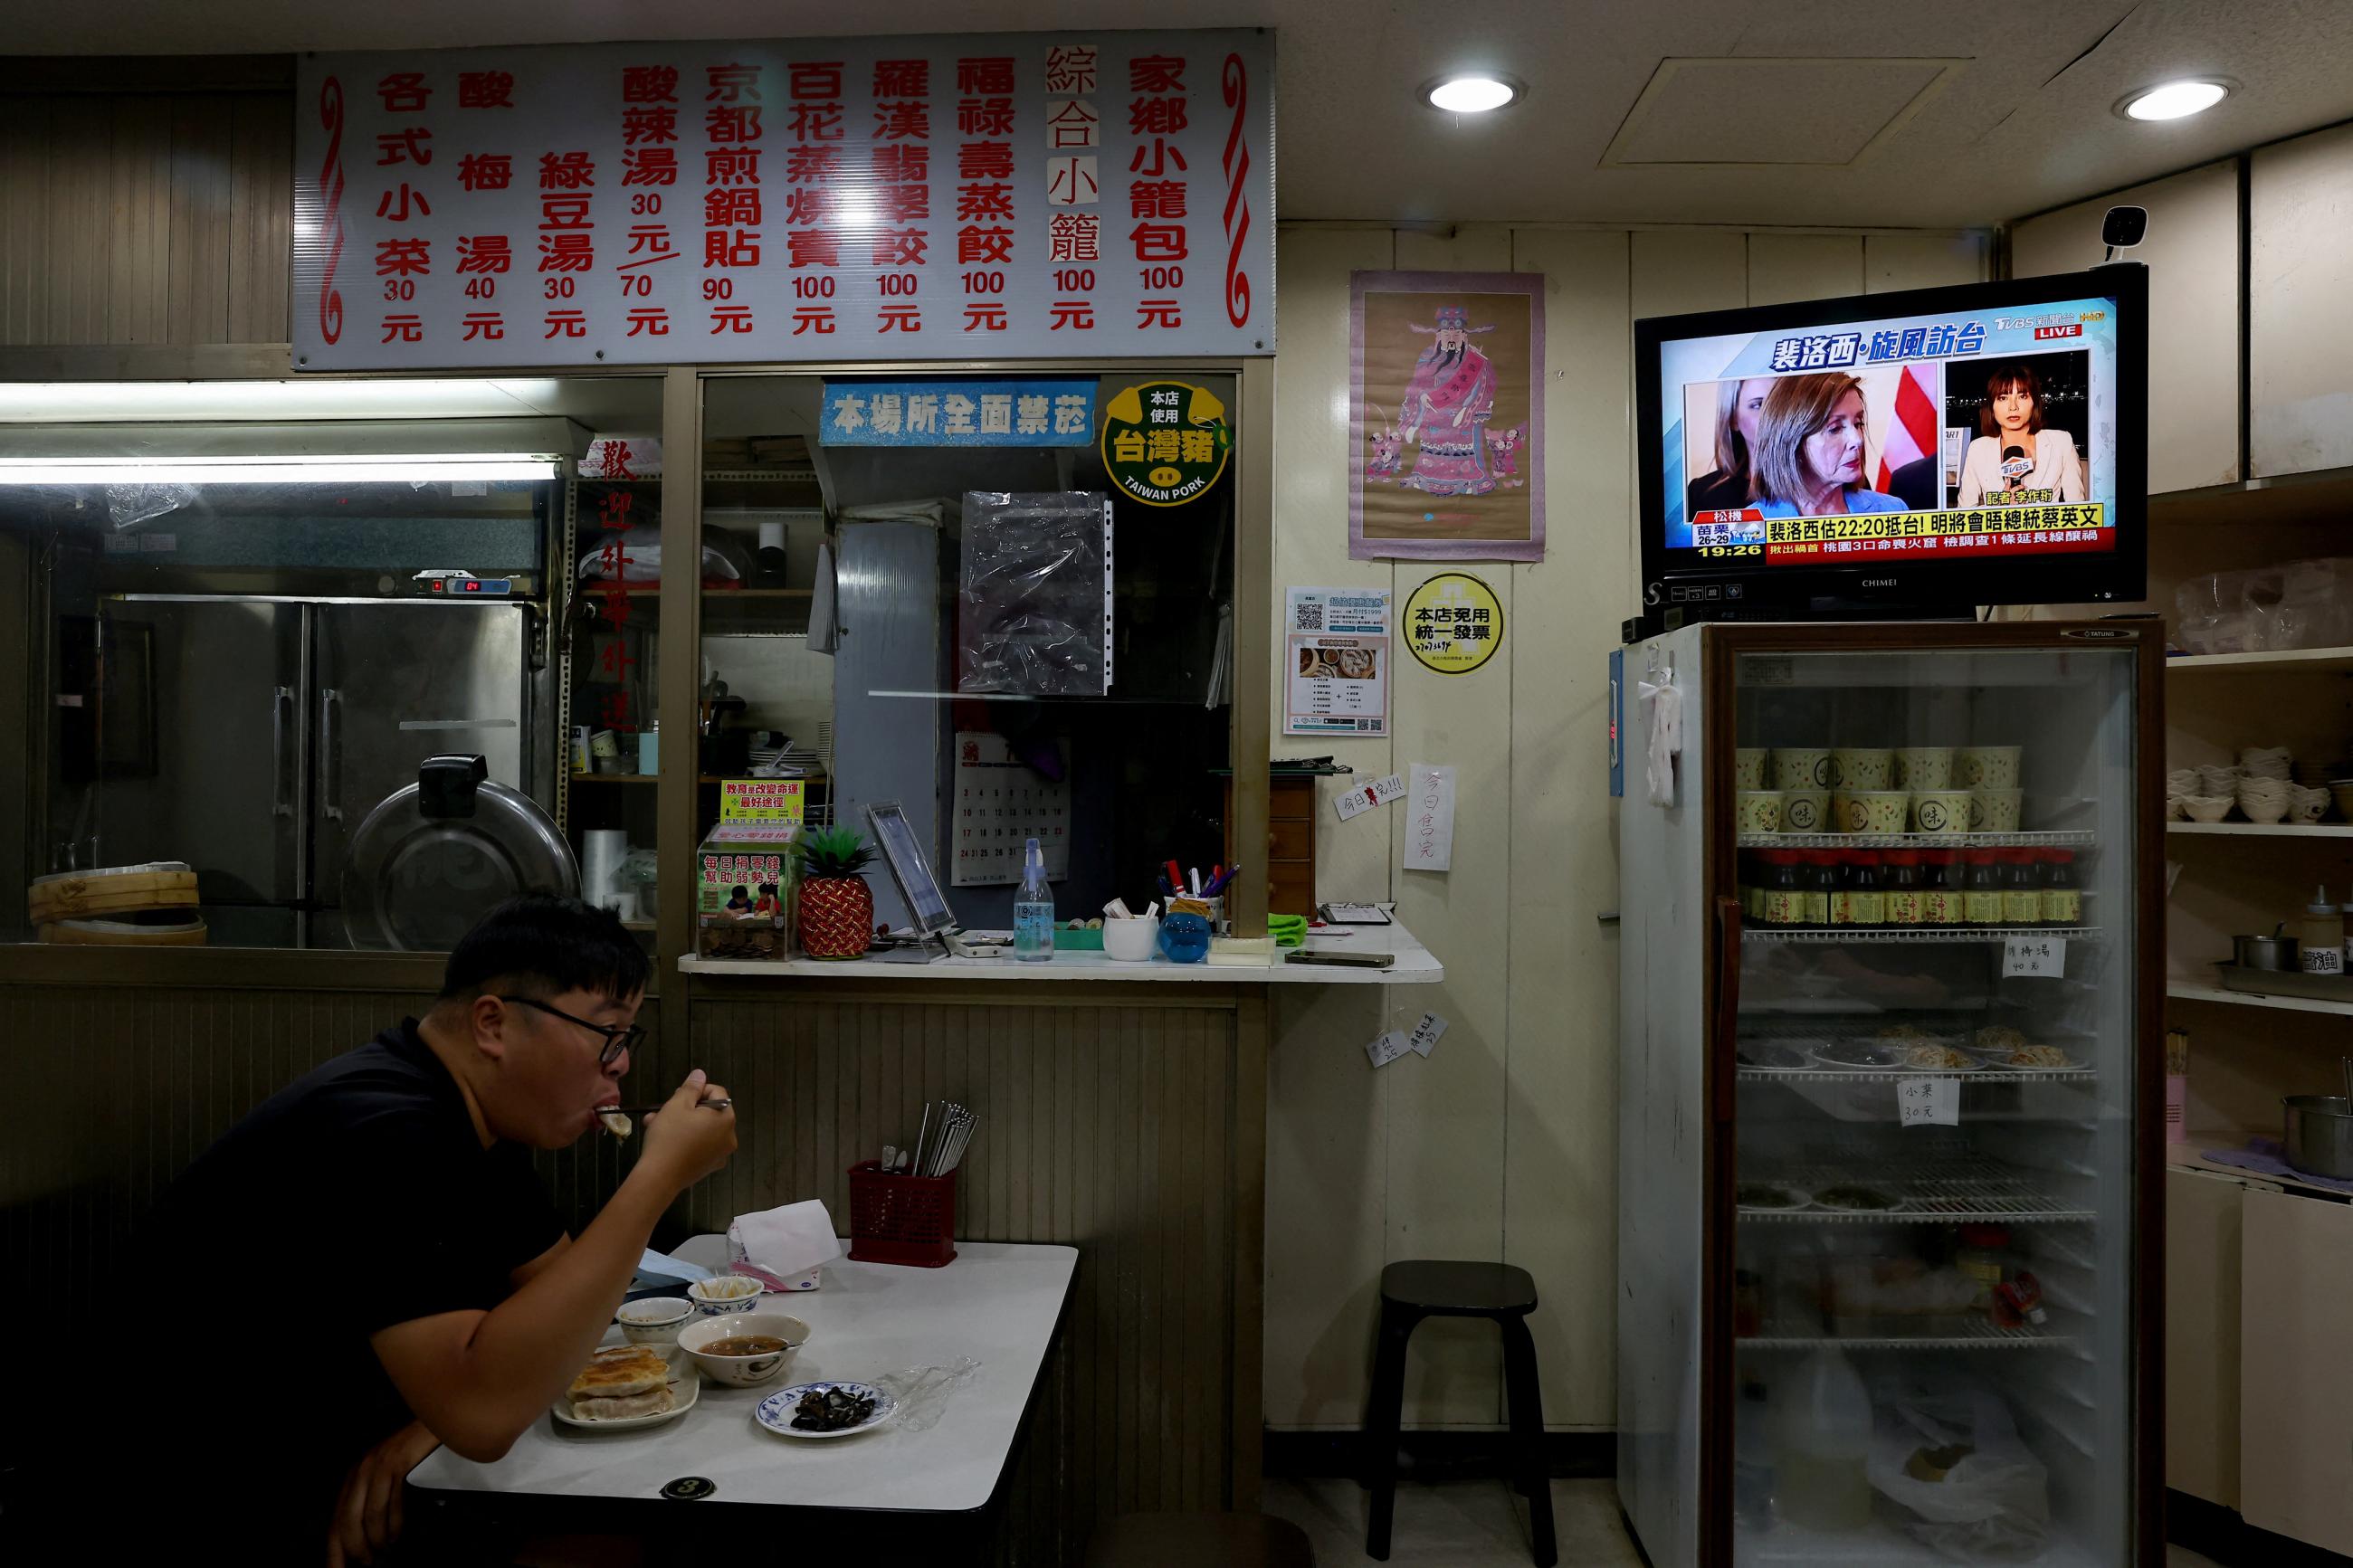 A man is photographed eating  by himself at a dinner in Taipei, Taiwan, as a TV in the background displays footage of Nancy Pelosi's visit to the island